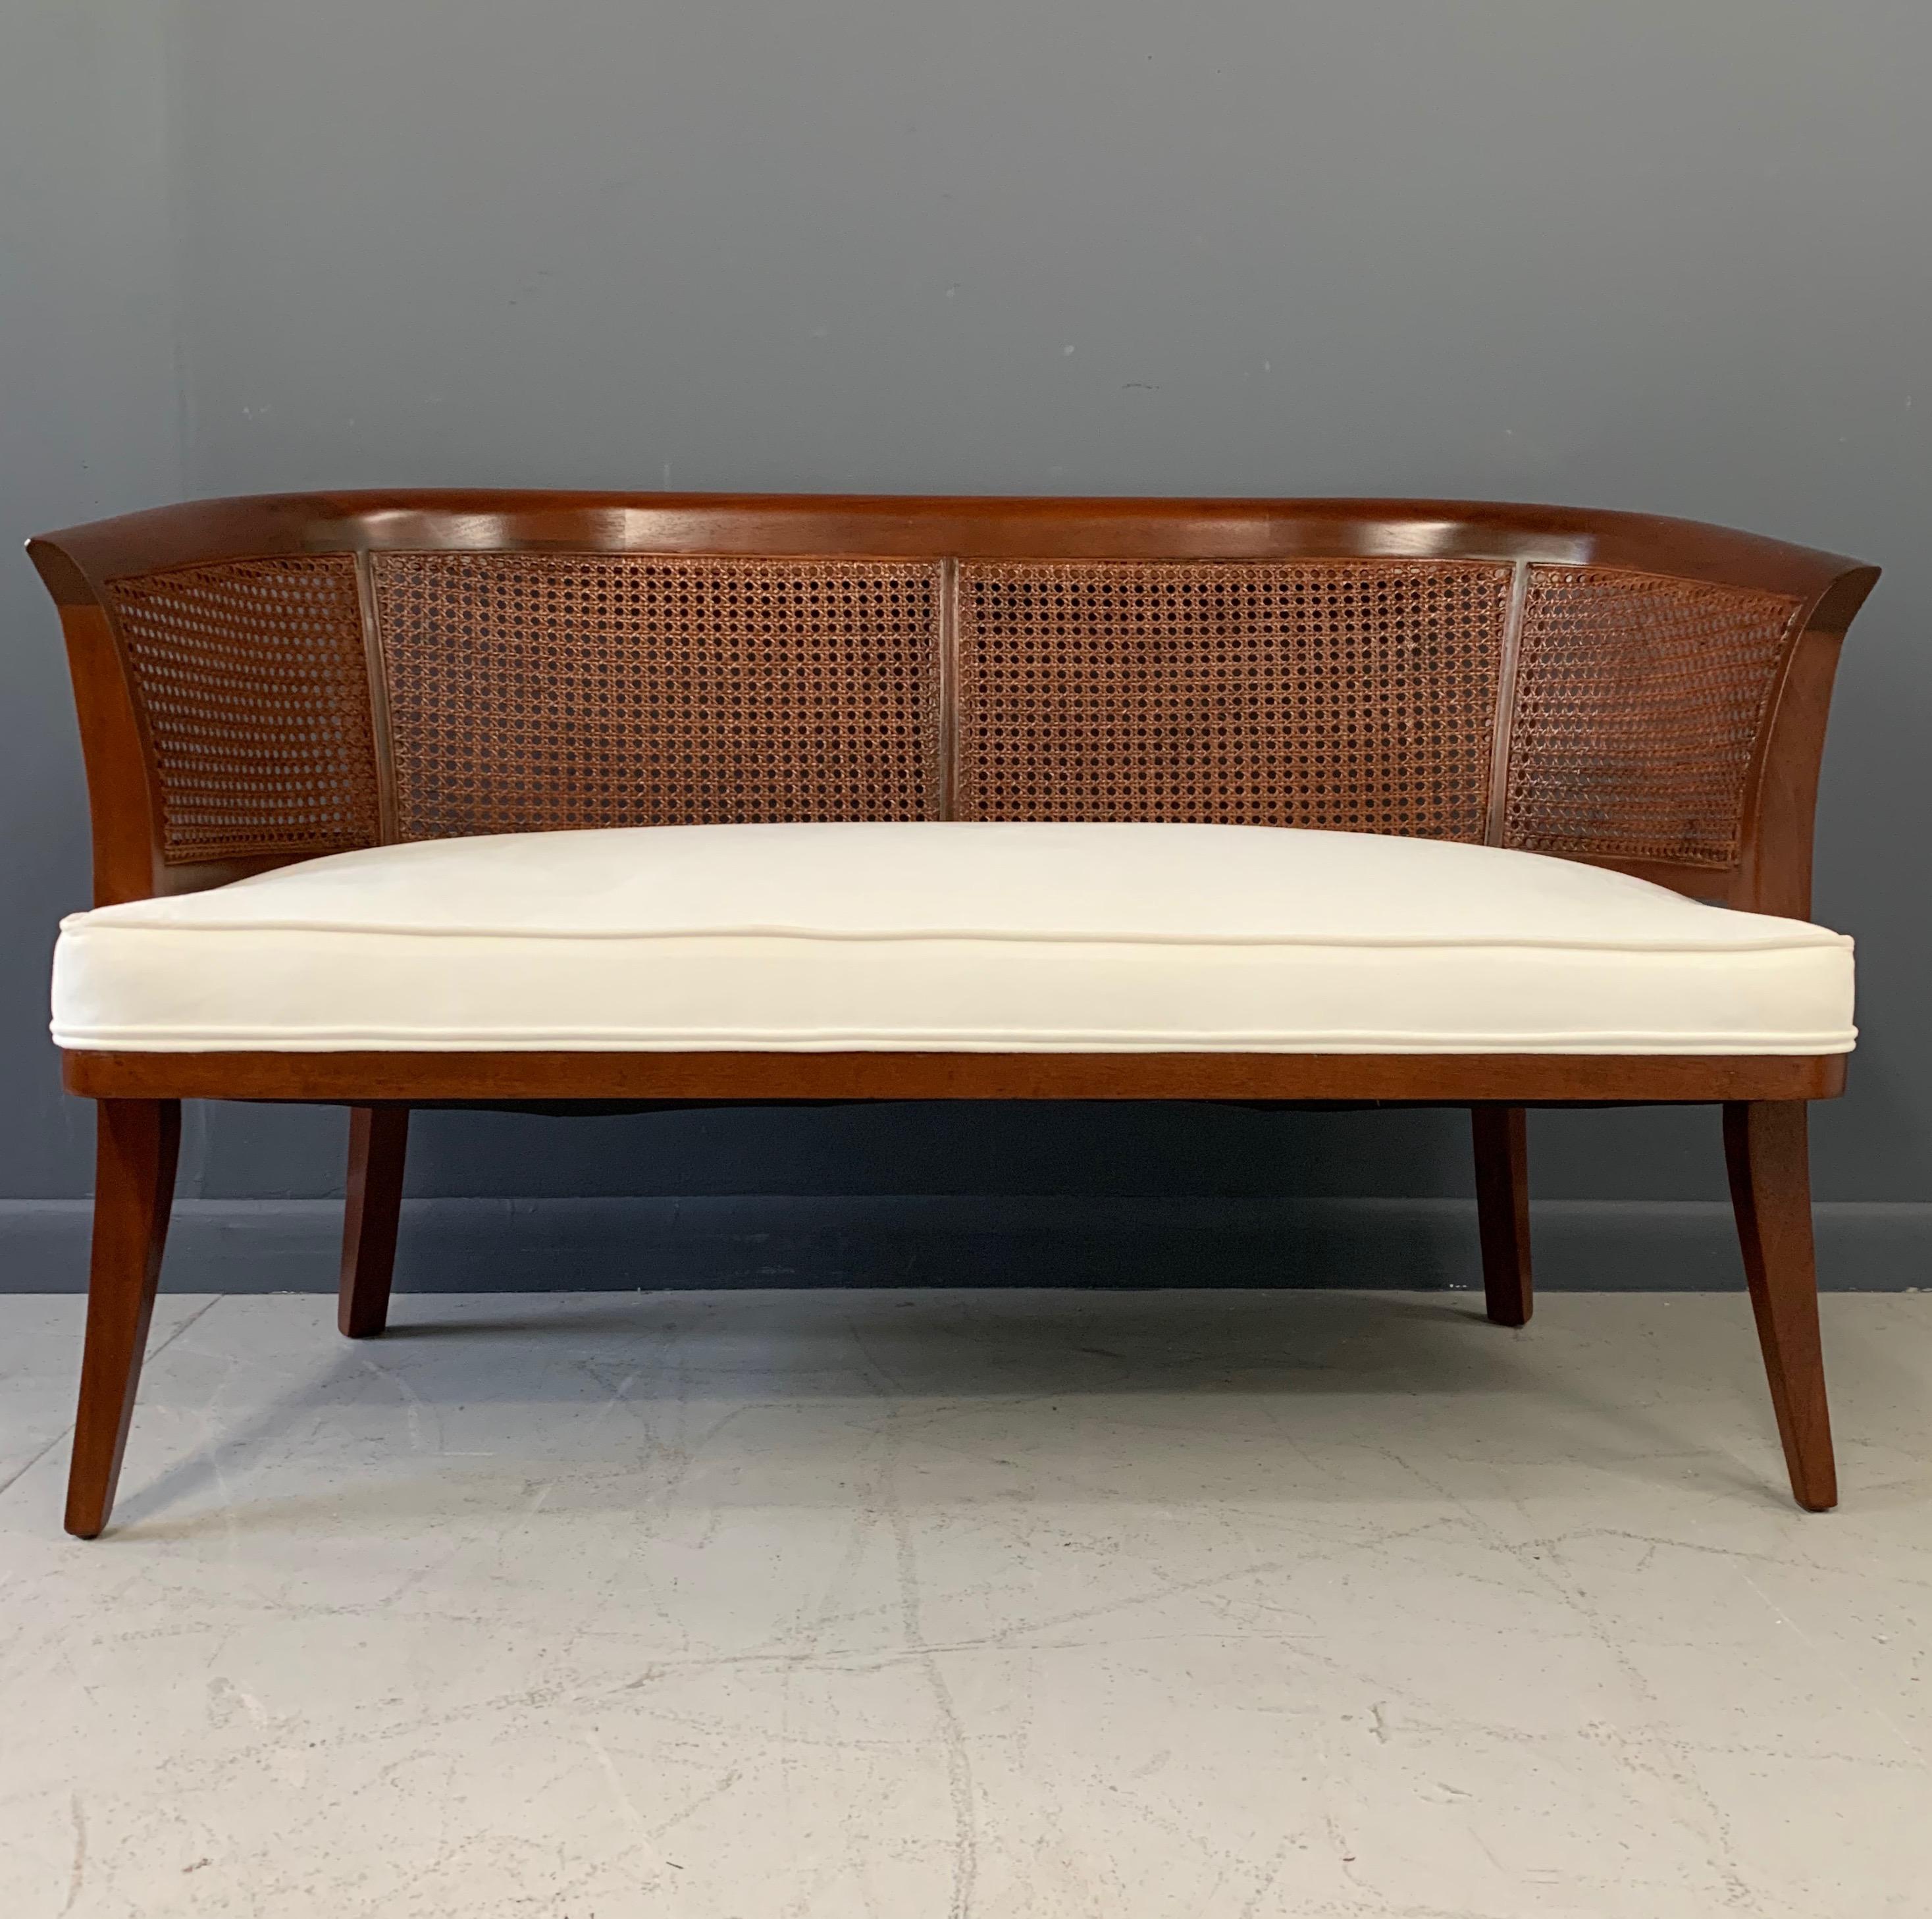 This Classic bench has been newly refinished and reupholstered in a white micro fibre. With its curved back and saber legs, this bench would be a welcome addition to any decor.

The saber leg design is a staple of midcentury designers such as: